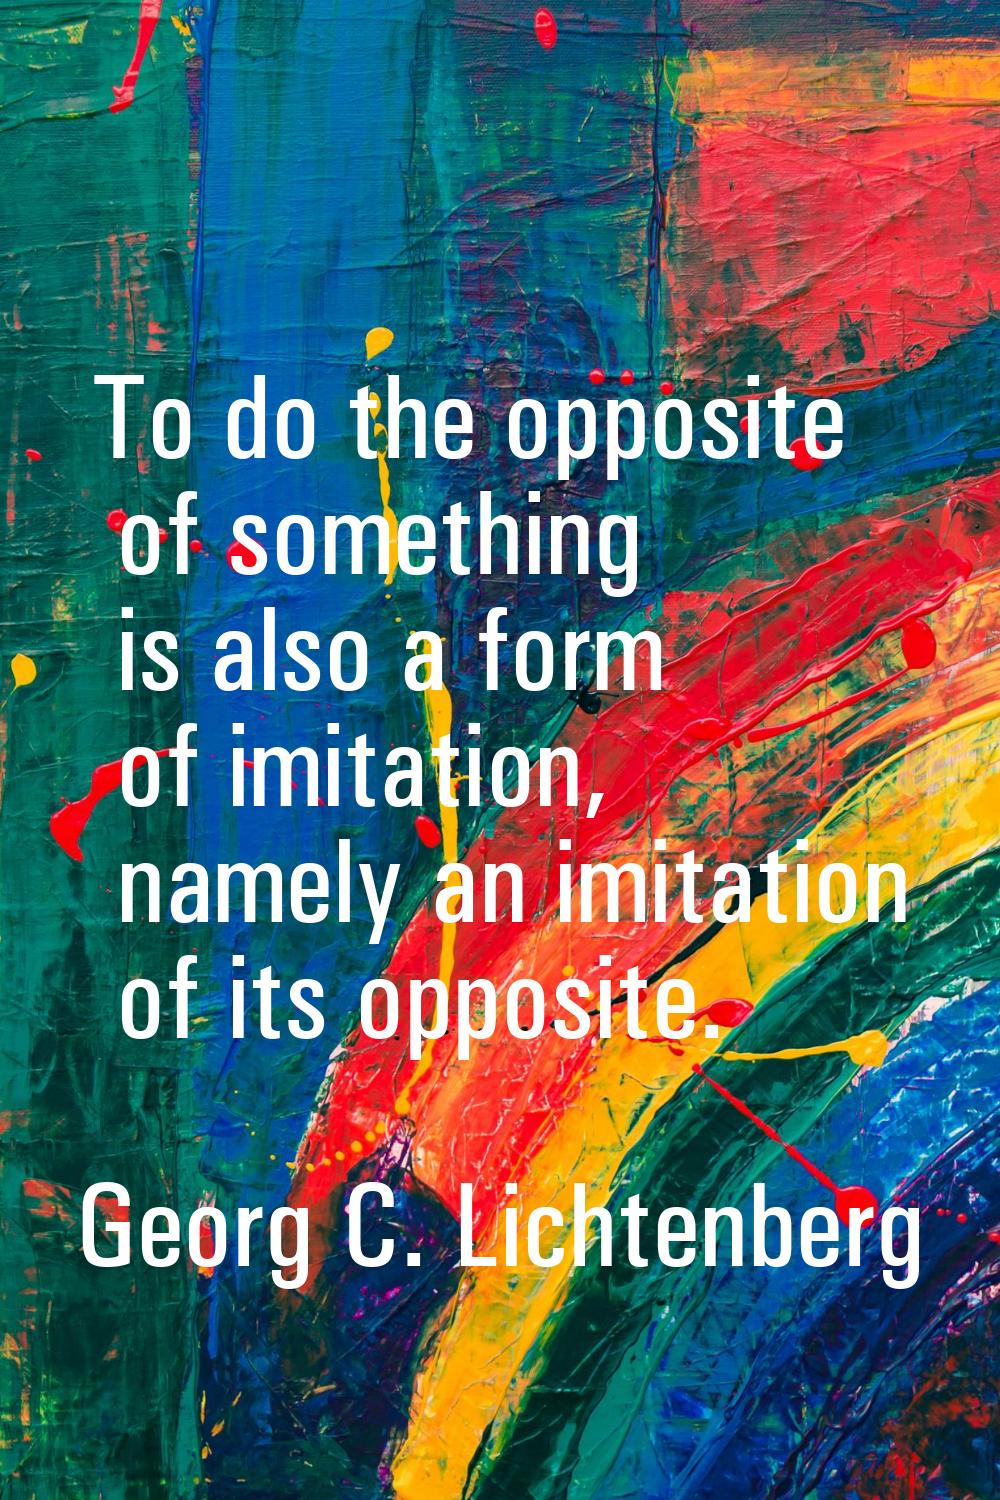 To do the opposite of something is also a form of imitation, namely an imitation of its opposite.